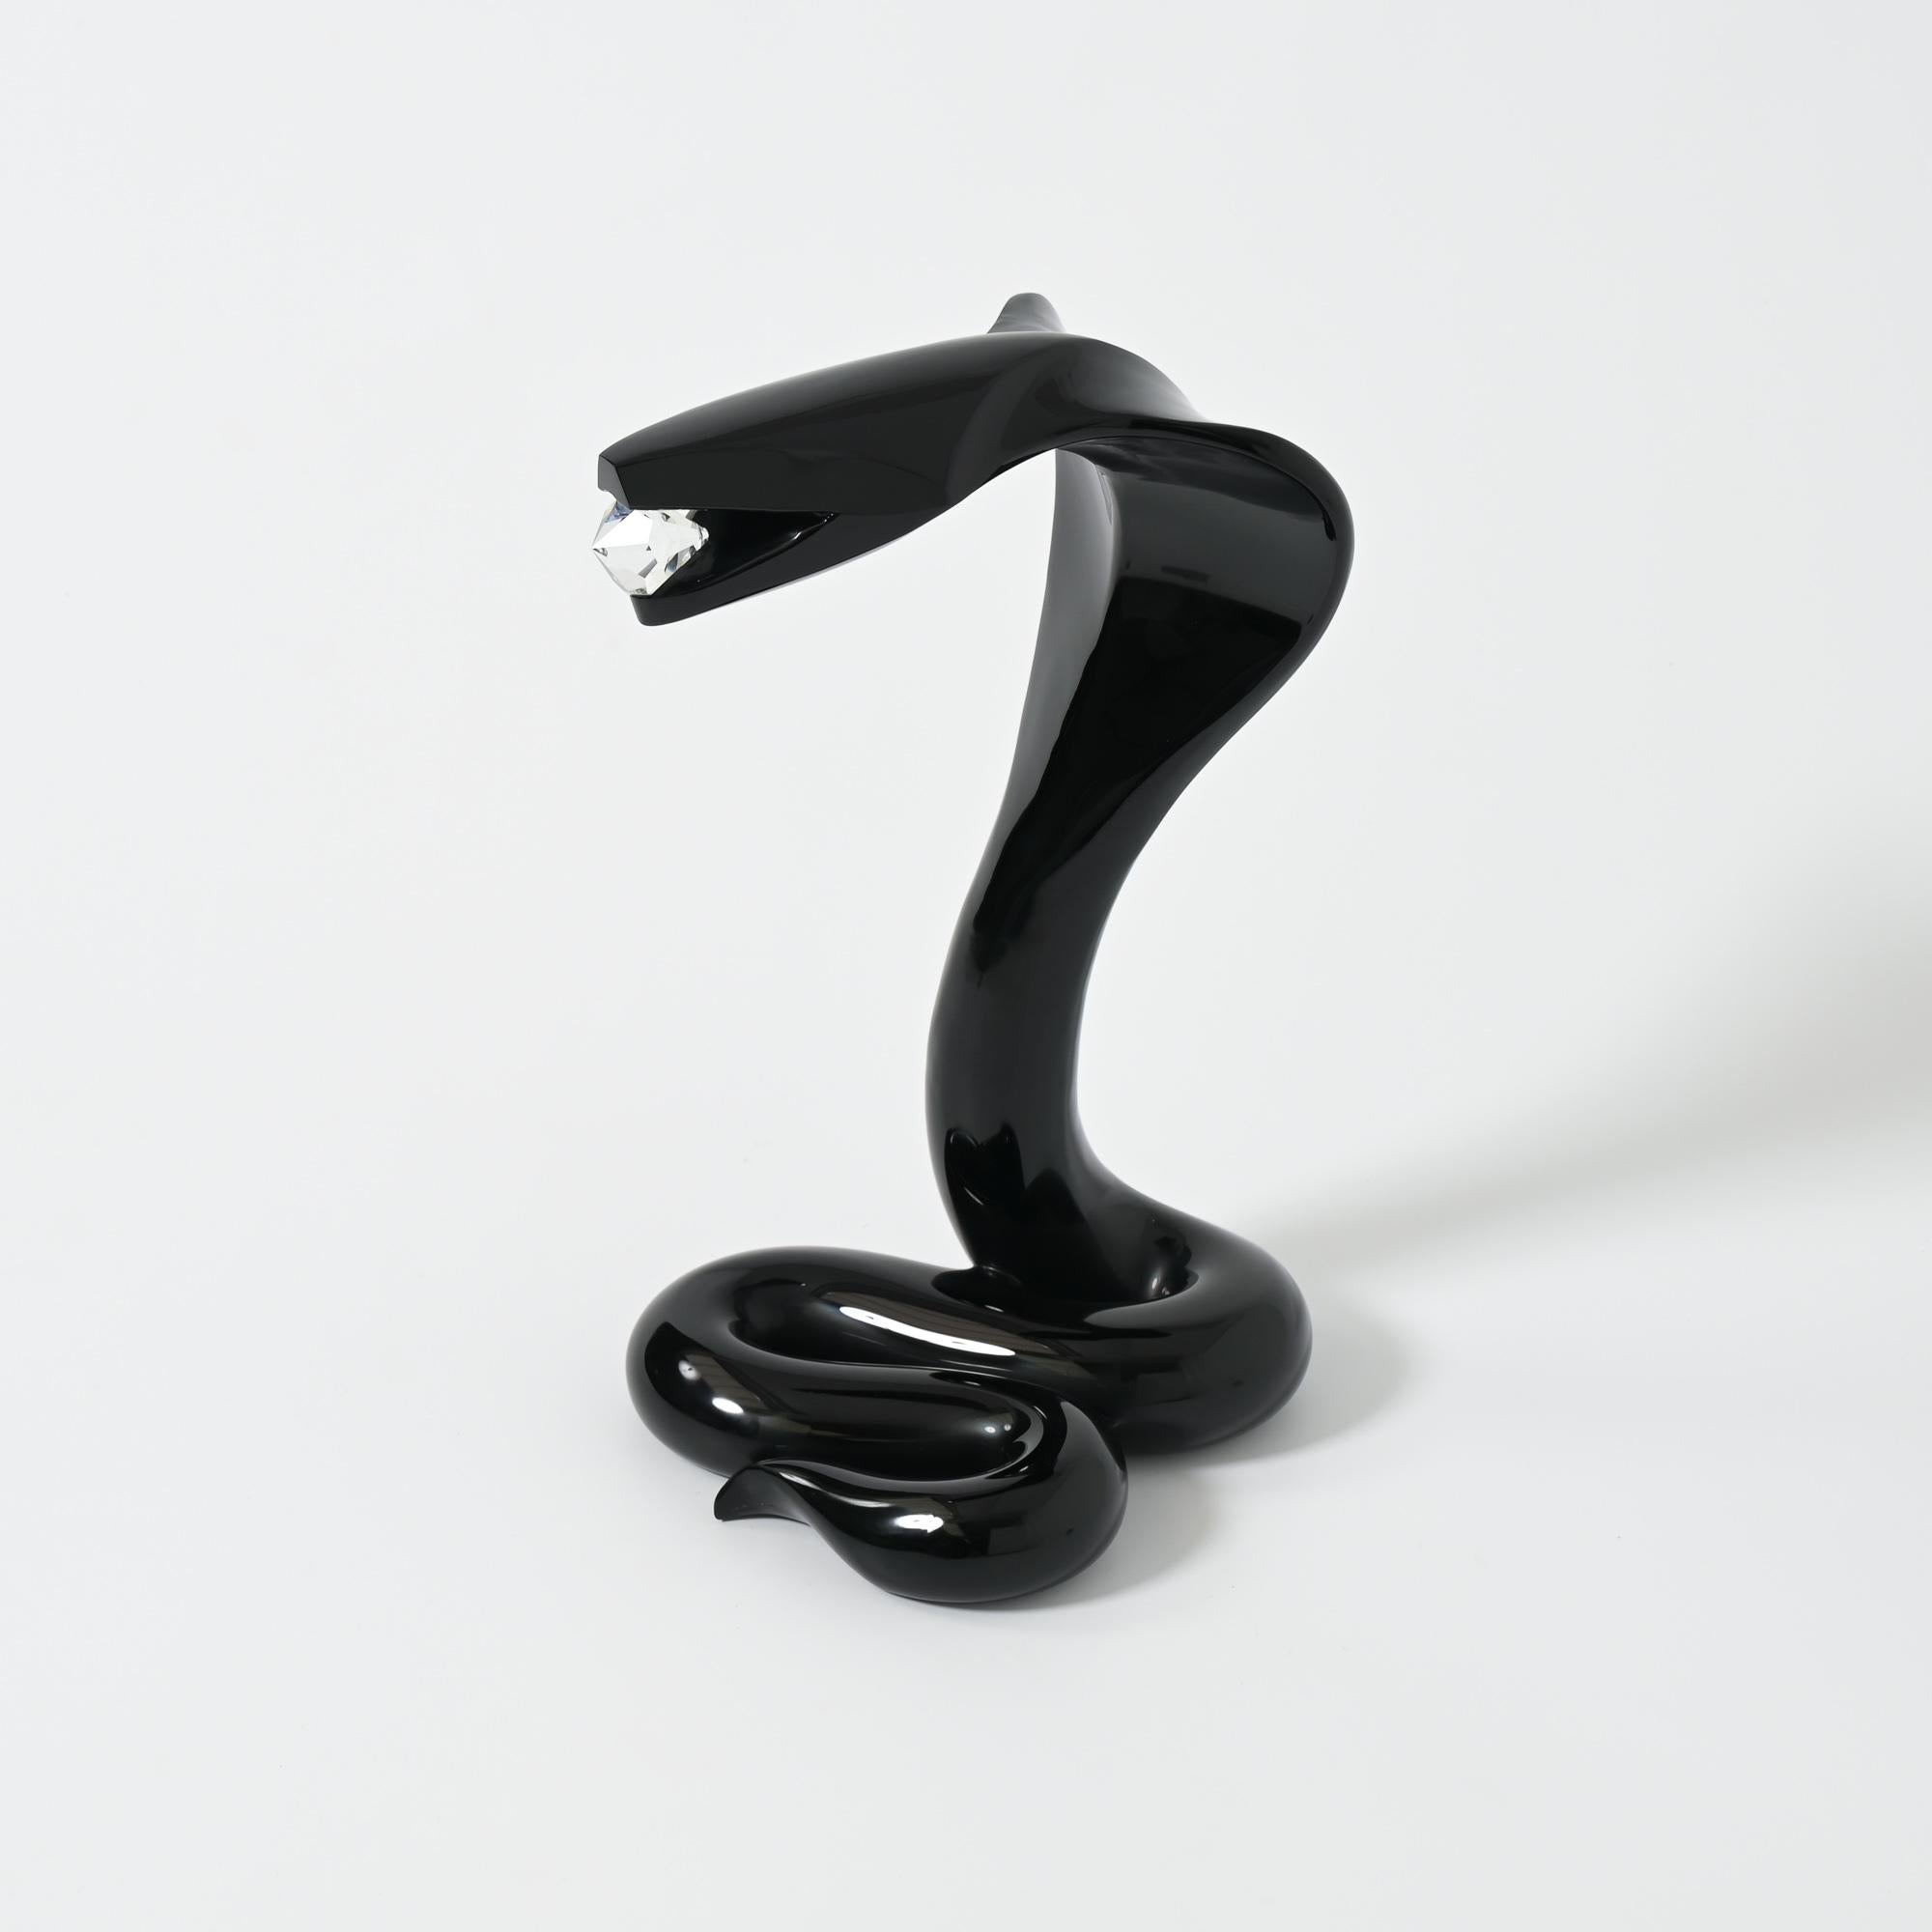 This Cobra sculpture was created and made by the famous Italian glass artist Loredano Rosin in his workshop in Murano, Venice, Italy in the 1980s.
The black Murano glass cobra holds a clear Murano glass diamond.
It is an impressive sculpture in